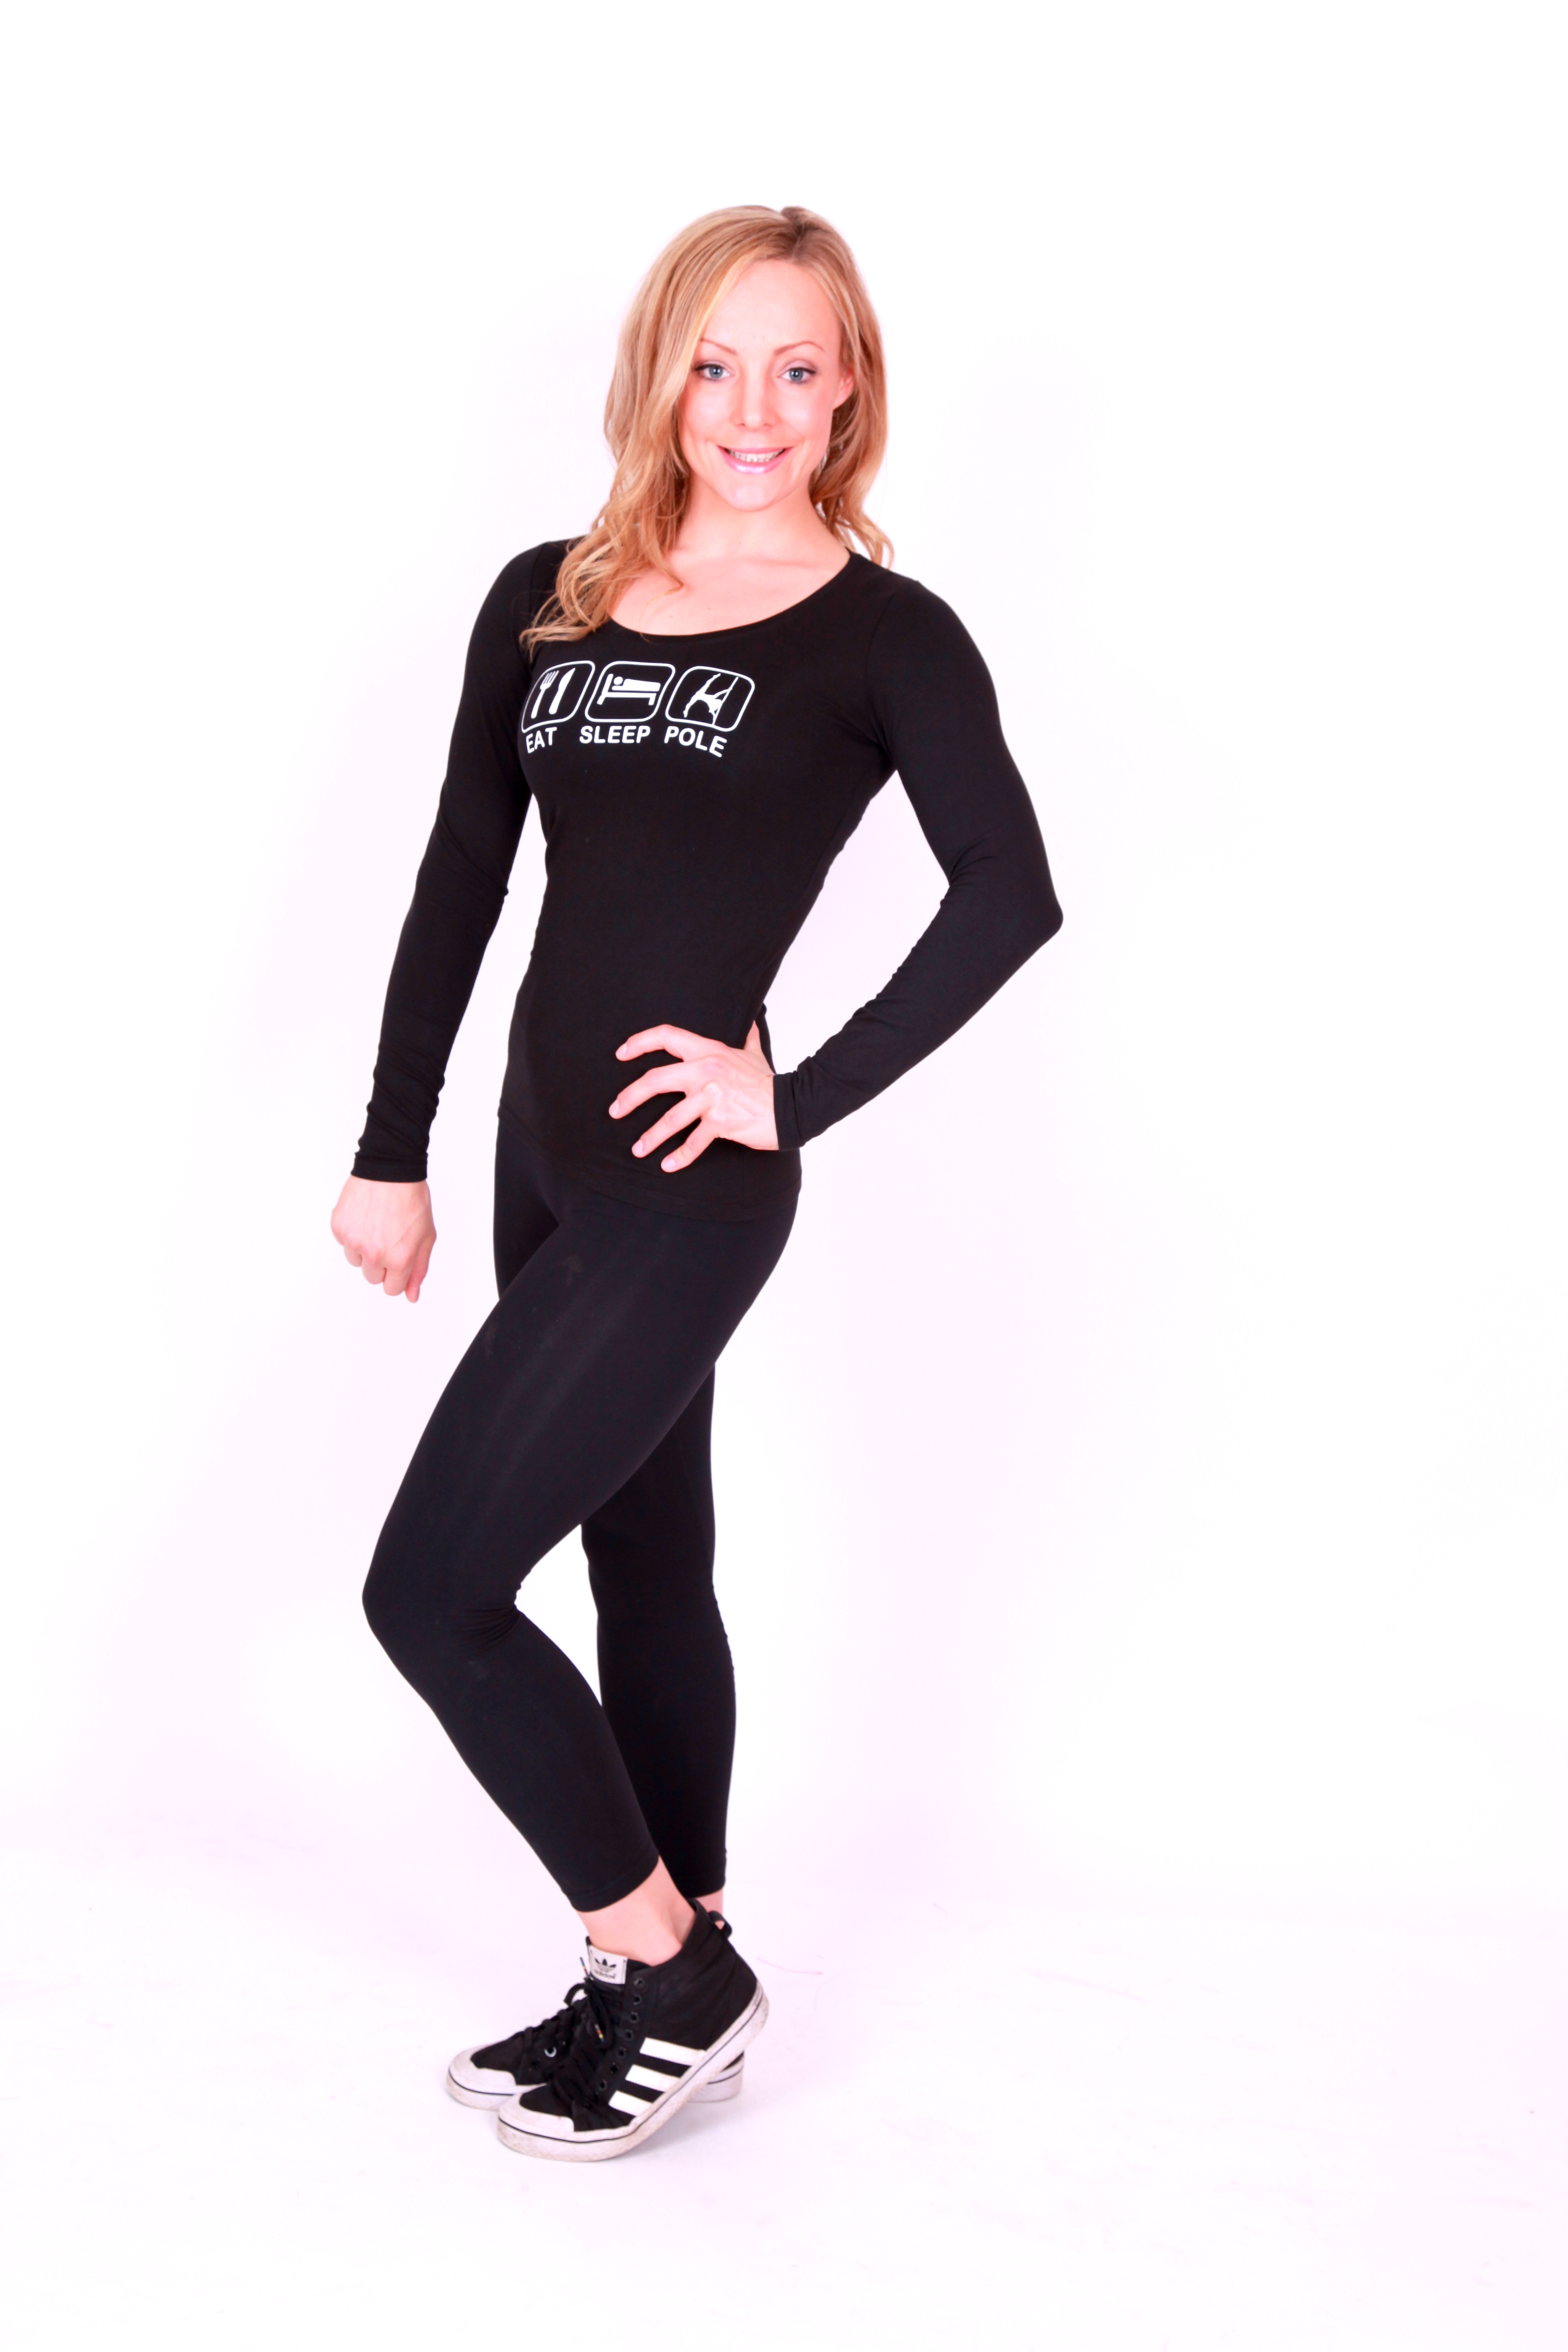 6 Day Pole Dancing Workout Clothes for Push Pull Legs